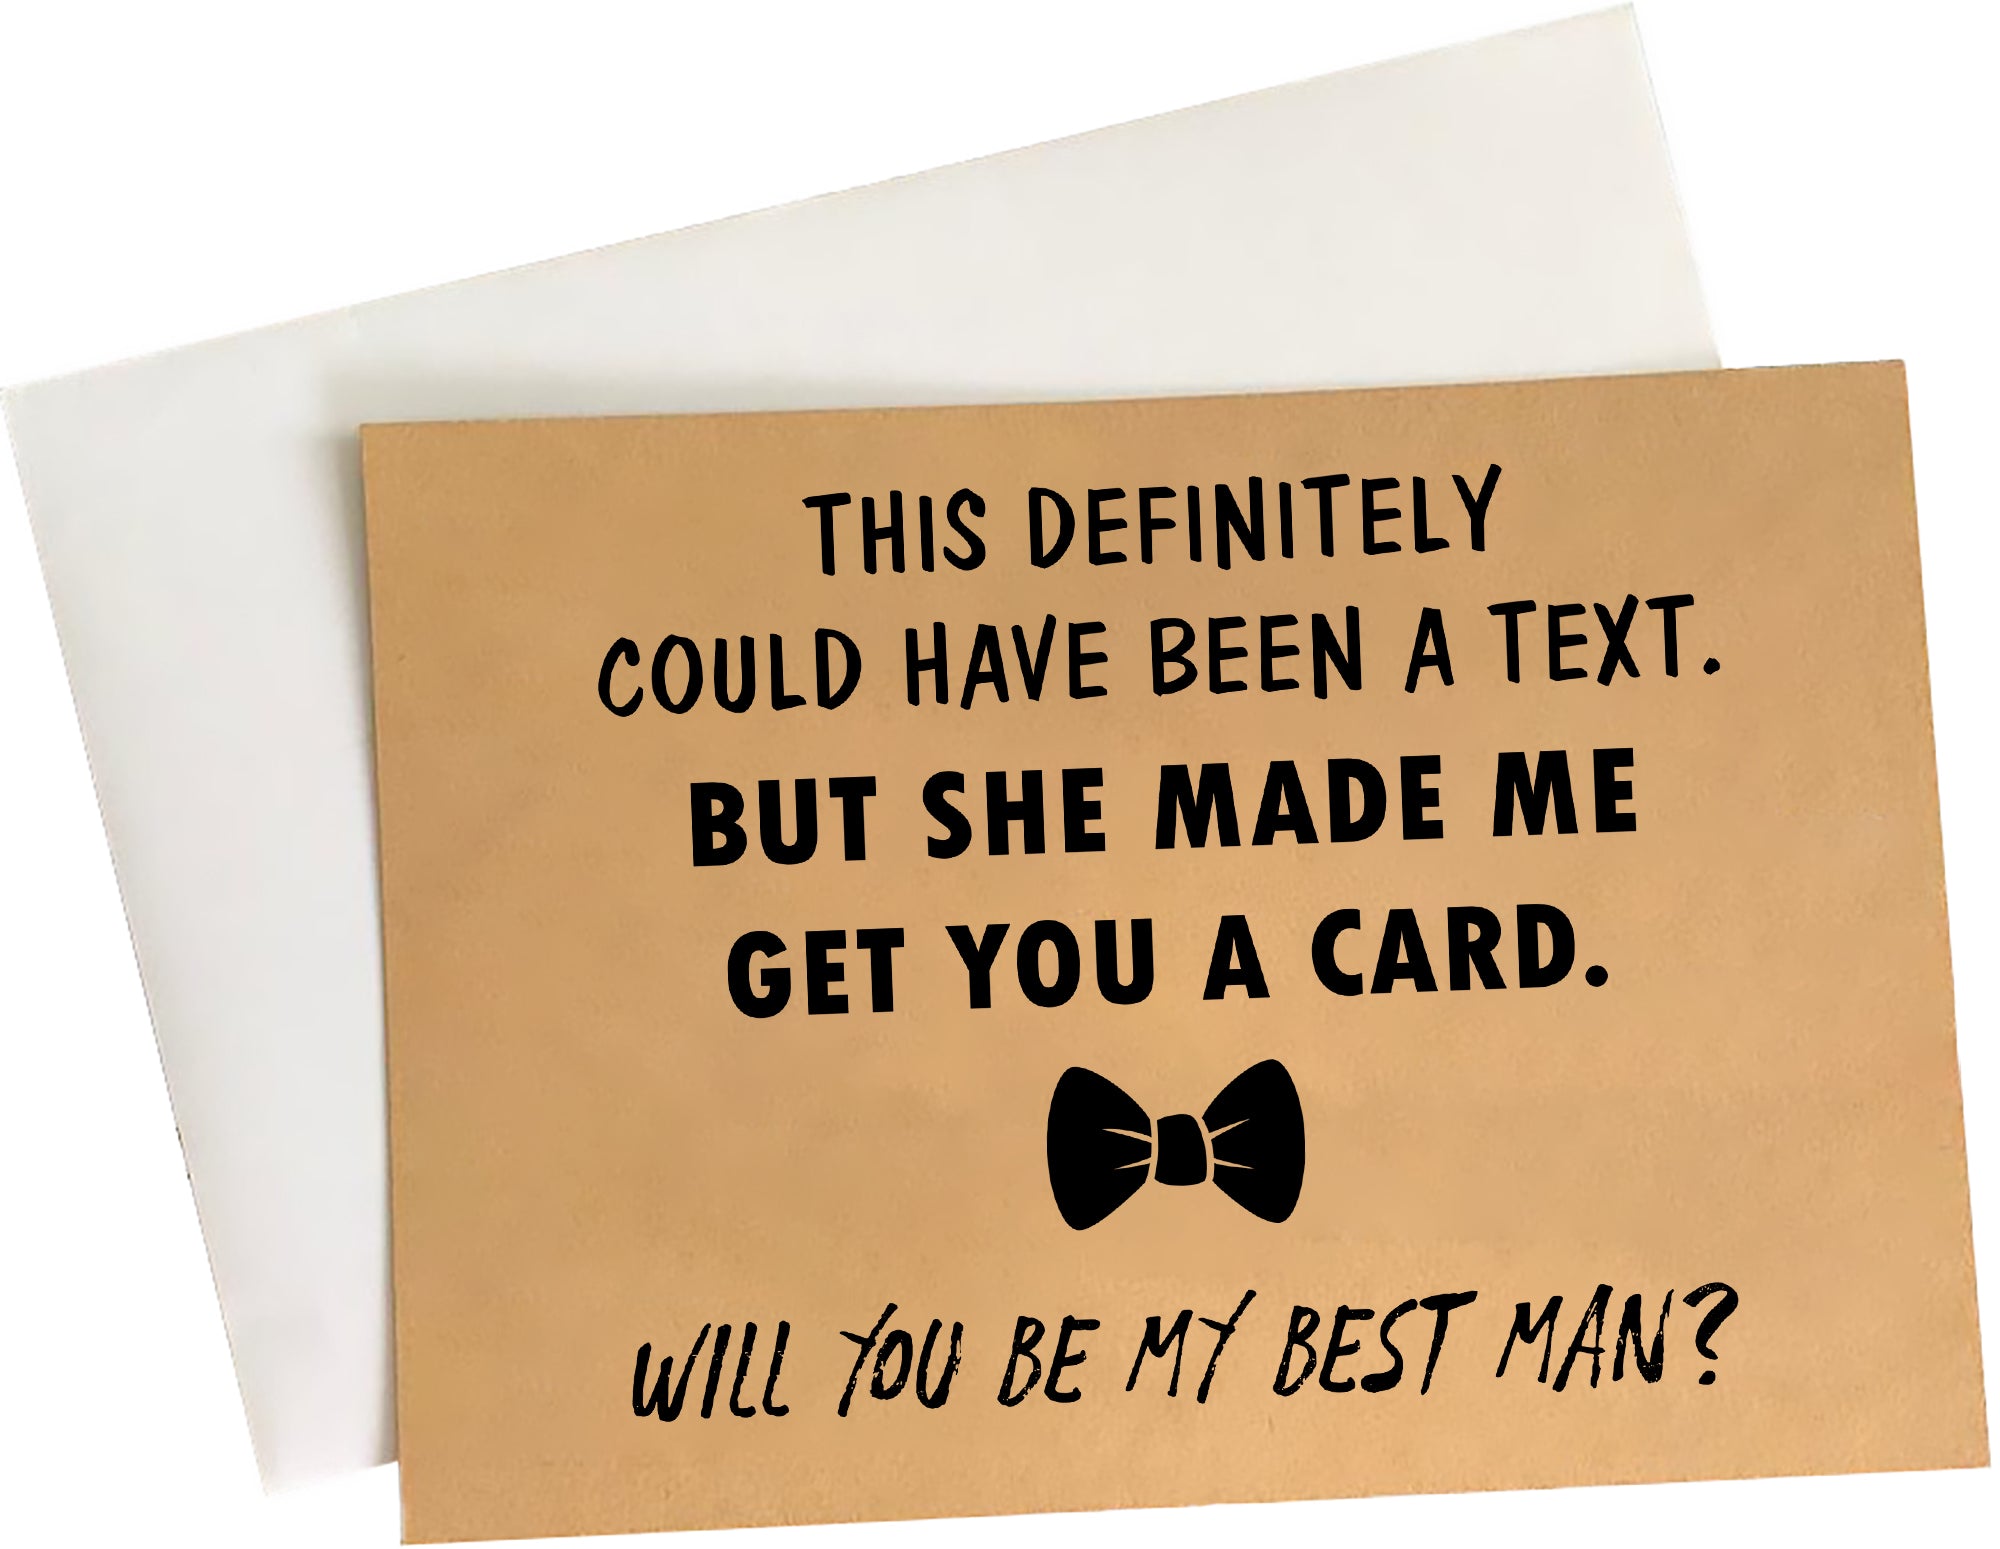 Groomsmen Proposal Cards - Set of 8 with Envelopes 5" x 7" | Funny Groomsmen Proposal Gifts for Wedding